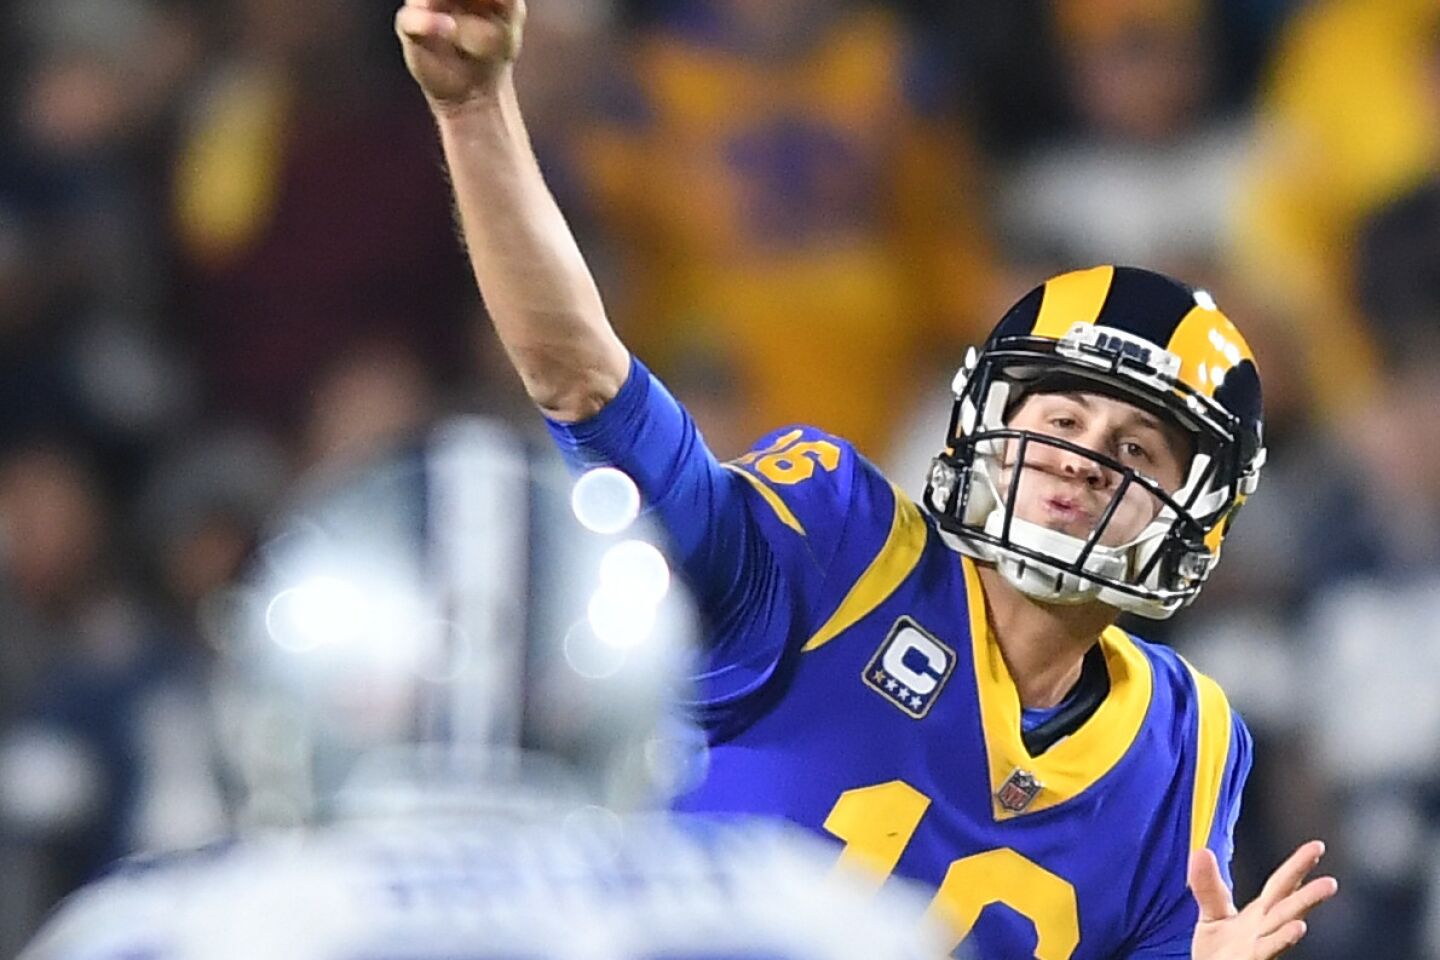 Rams quarterback Jared Goff unleashes a pass off against the Cowboys.